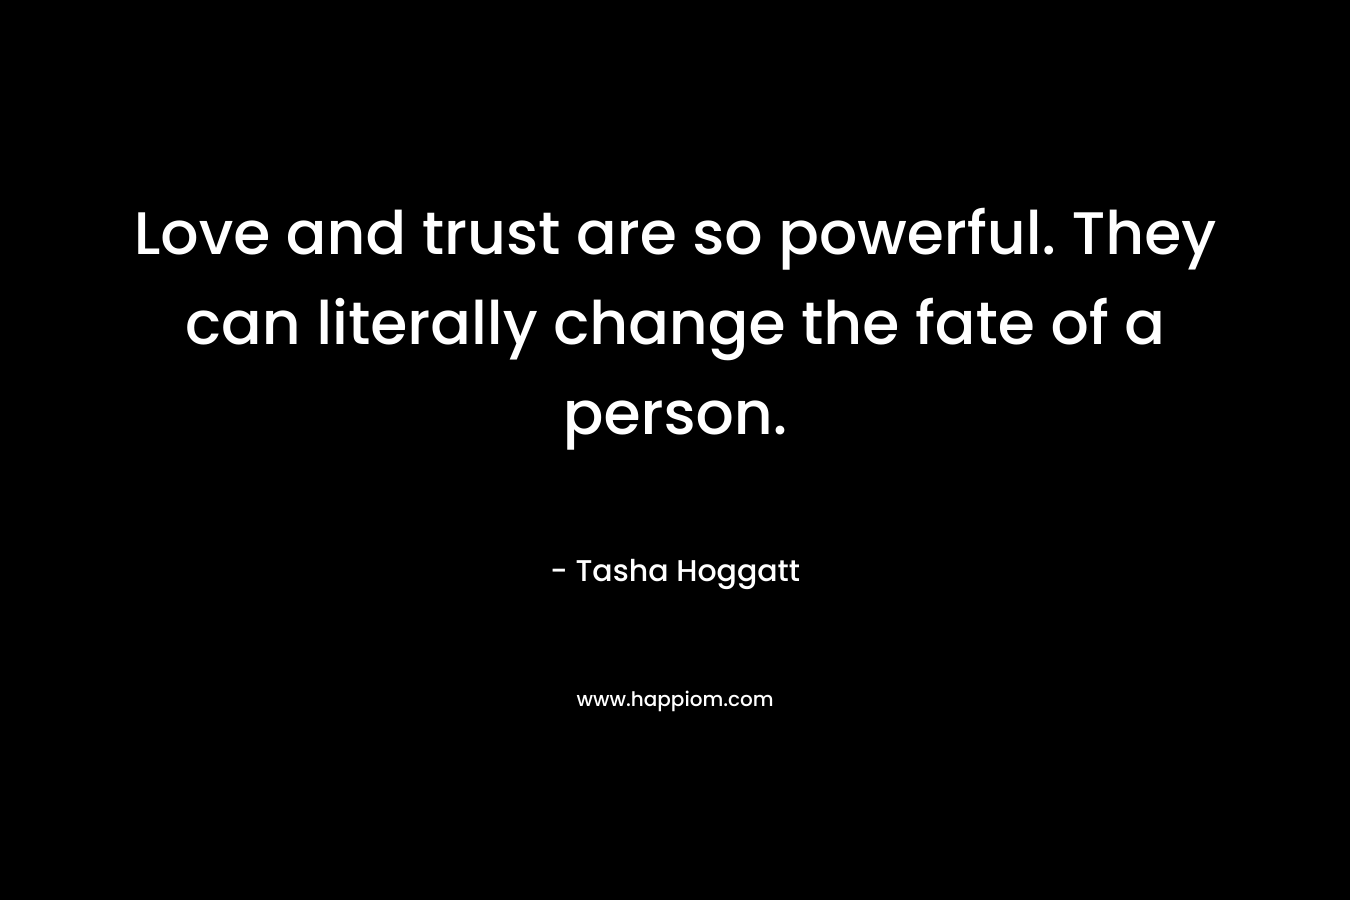 Love and trust are so powerful. They can literally change the fate of a person. – Tasha Hoggatt